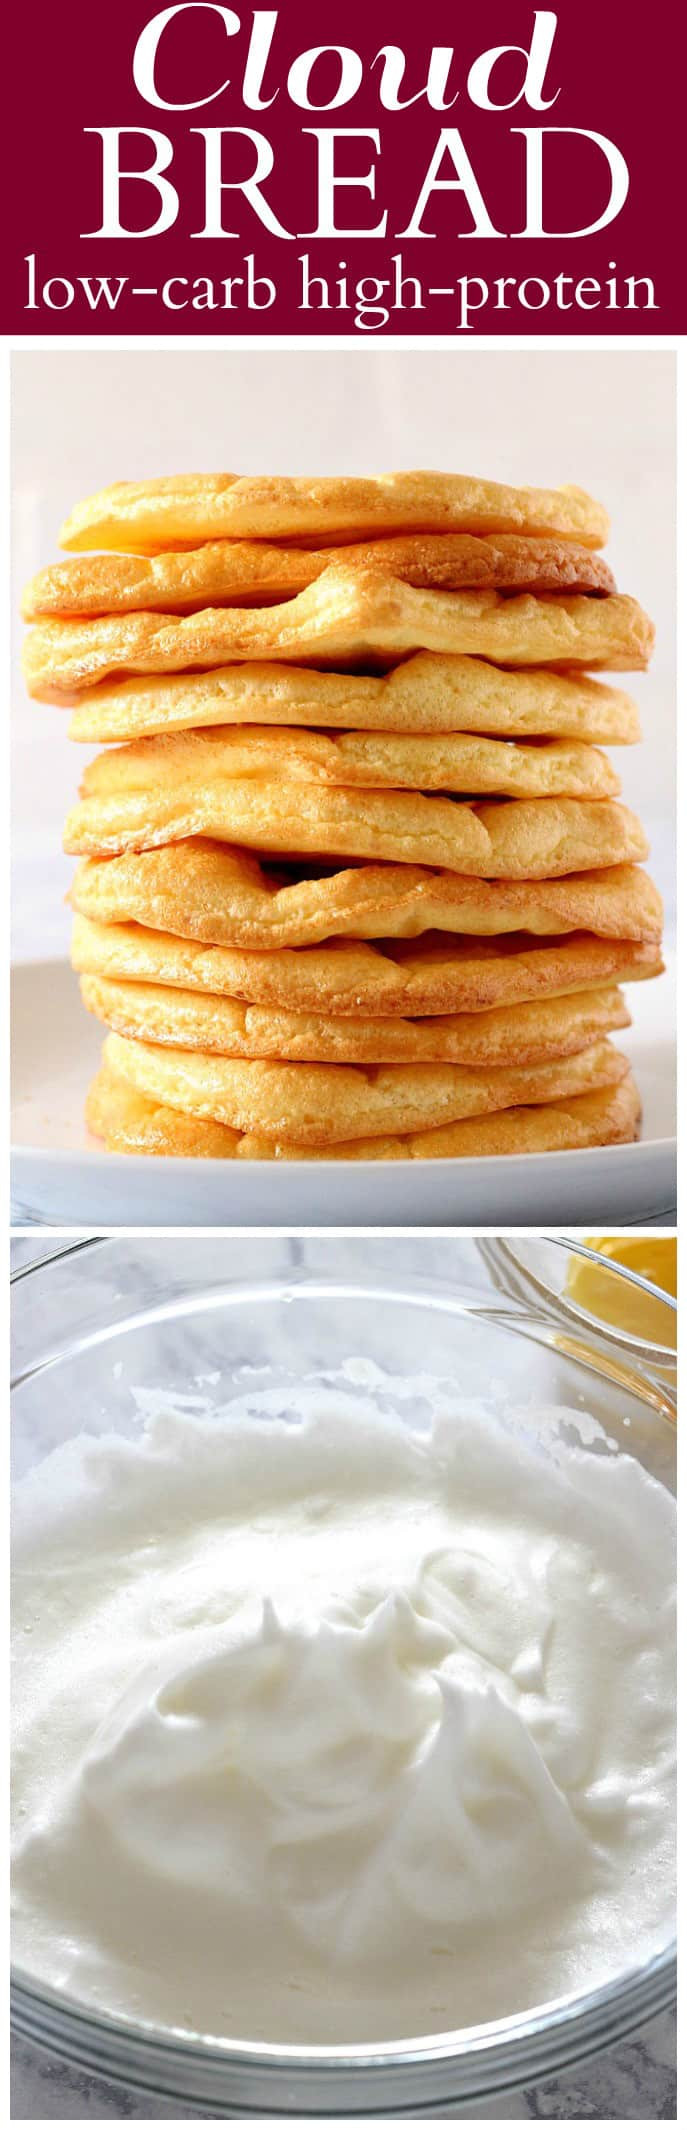 Bread Substitute For Low Carb Diet
 Cloud Bread Recipe Crunchy Creamy Sweet